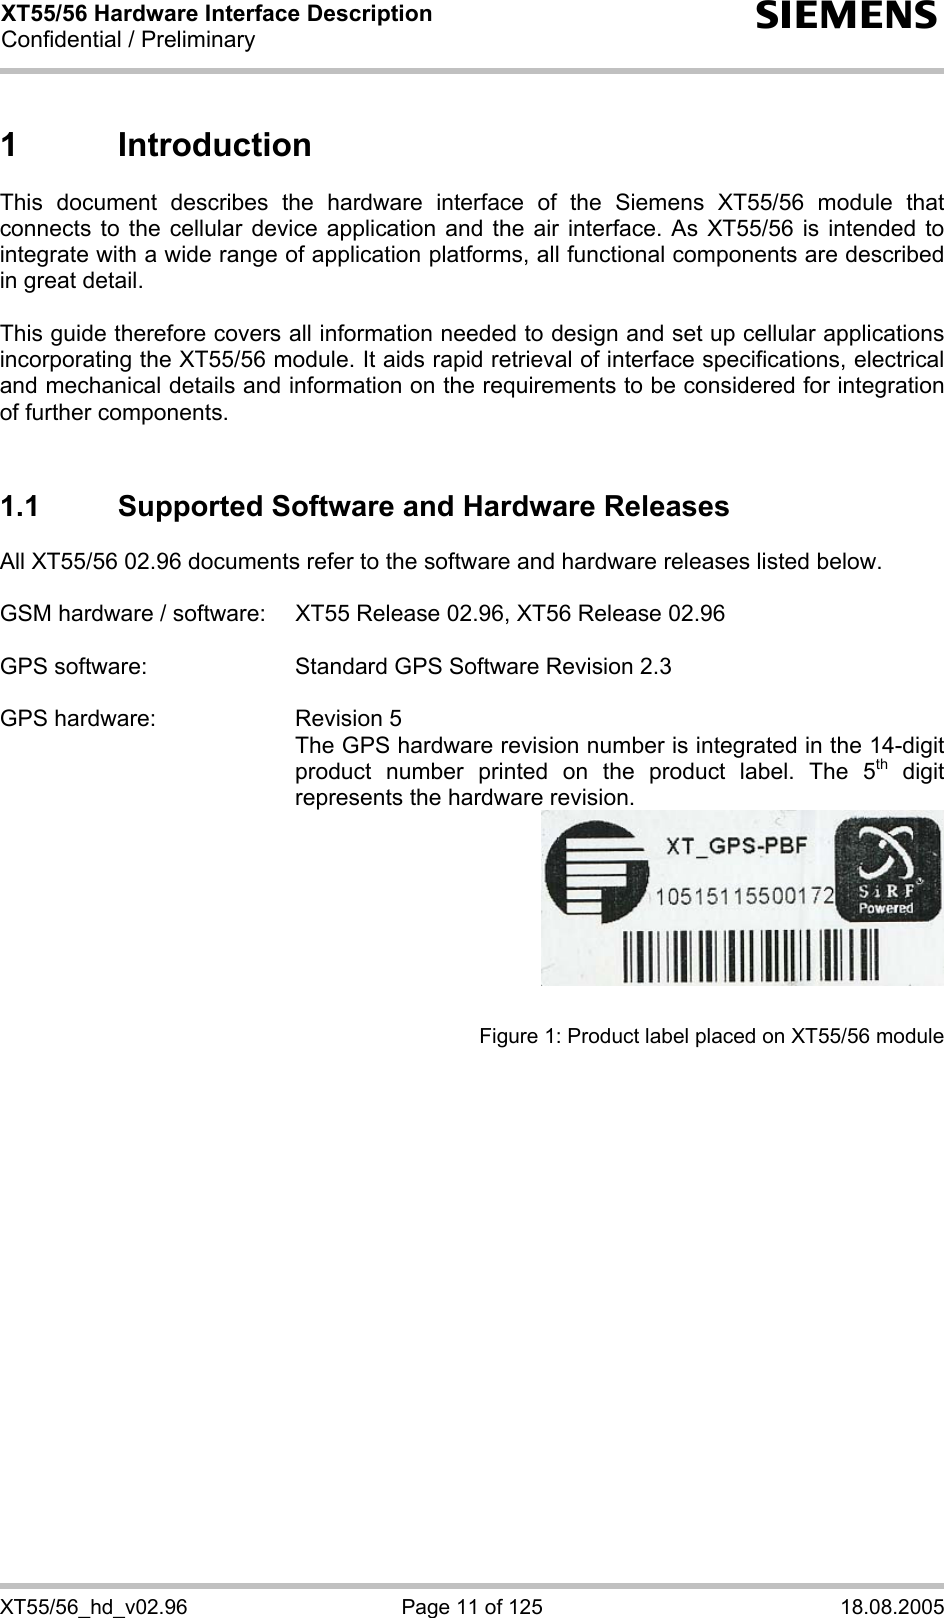 XT55/56 Hardware Interface Description Confidential / Preliminary s XT55/56_hd_v02.96  Page 11 of 125  18.08.2005 1 Introduction This document describes the hardware interface of the Siemens XT55/56 module that connects to the cellular device application and the air interface. As XT55/56 is intended to integrate with a wide range of application platforms, all functional components are described in great detail.  This guide therefore covers all information needed to design and set up cellular applications incorporating the XT55/56 module. It aids rapid retrieval of interface specifications, electrical and mechanical details and information on the requirements to be considered for integration of further components.   1.1  Supported Software and Hardware Releases All XT55/56 02.96 documents refer to the software and hardware releases listed below.   GSM hardware / software:  XT55 Release 02.96, XT56 Release 02.96  GPS software:  Standard GPS Software Revision 2.3  GPS hardware:  Revision 5   The GPS hardware revision number is integrated in the 14-digit product number printed on the product label. The 5th digit represents the hardware revision.    Figure 1: Product label placed on XT55/56 module   